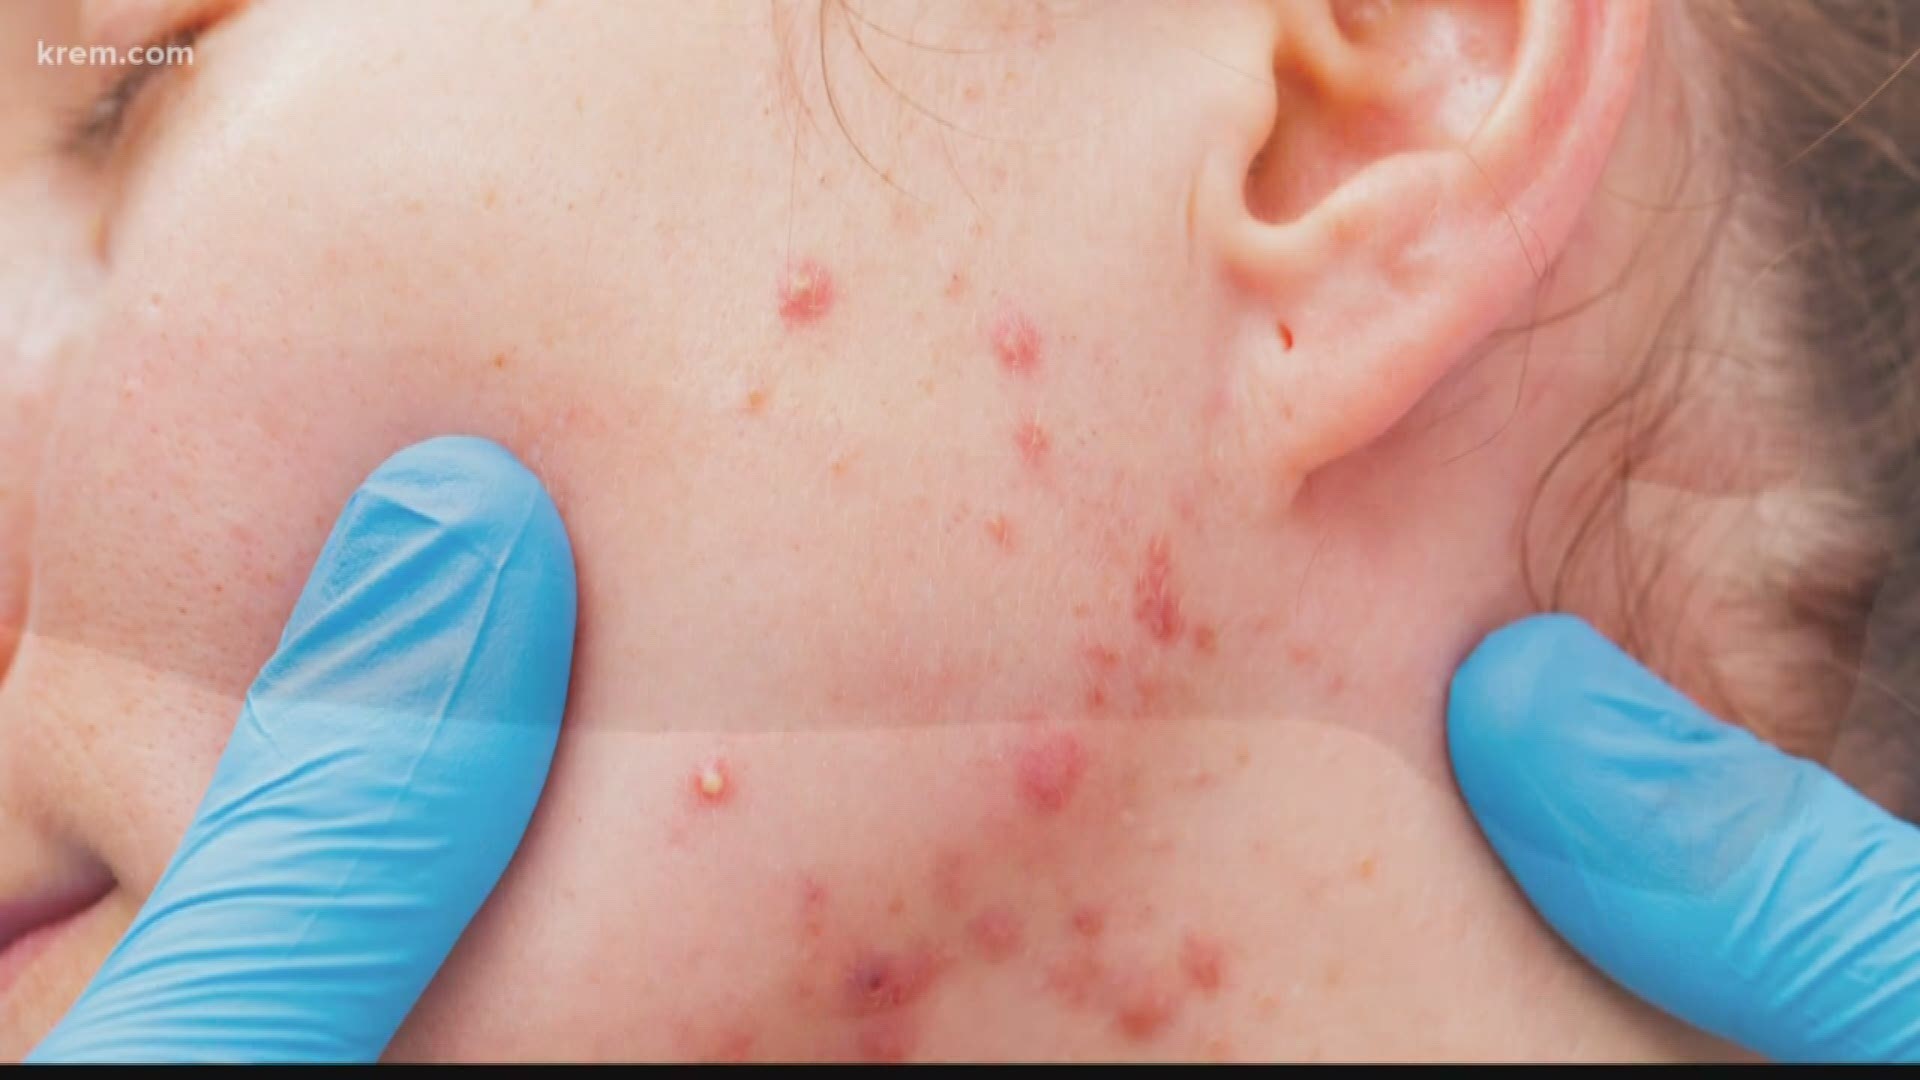 With the possibility of some measles cases coming to the eastern parts of Washington, doctors are advising parents on how keep their children safe